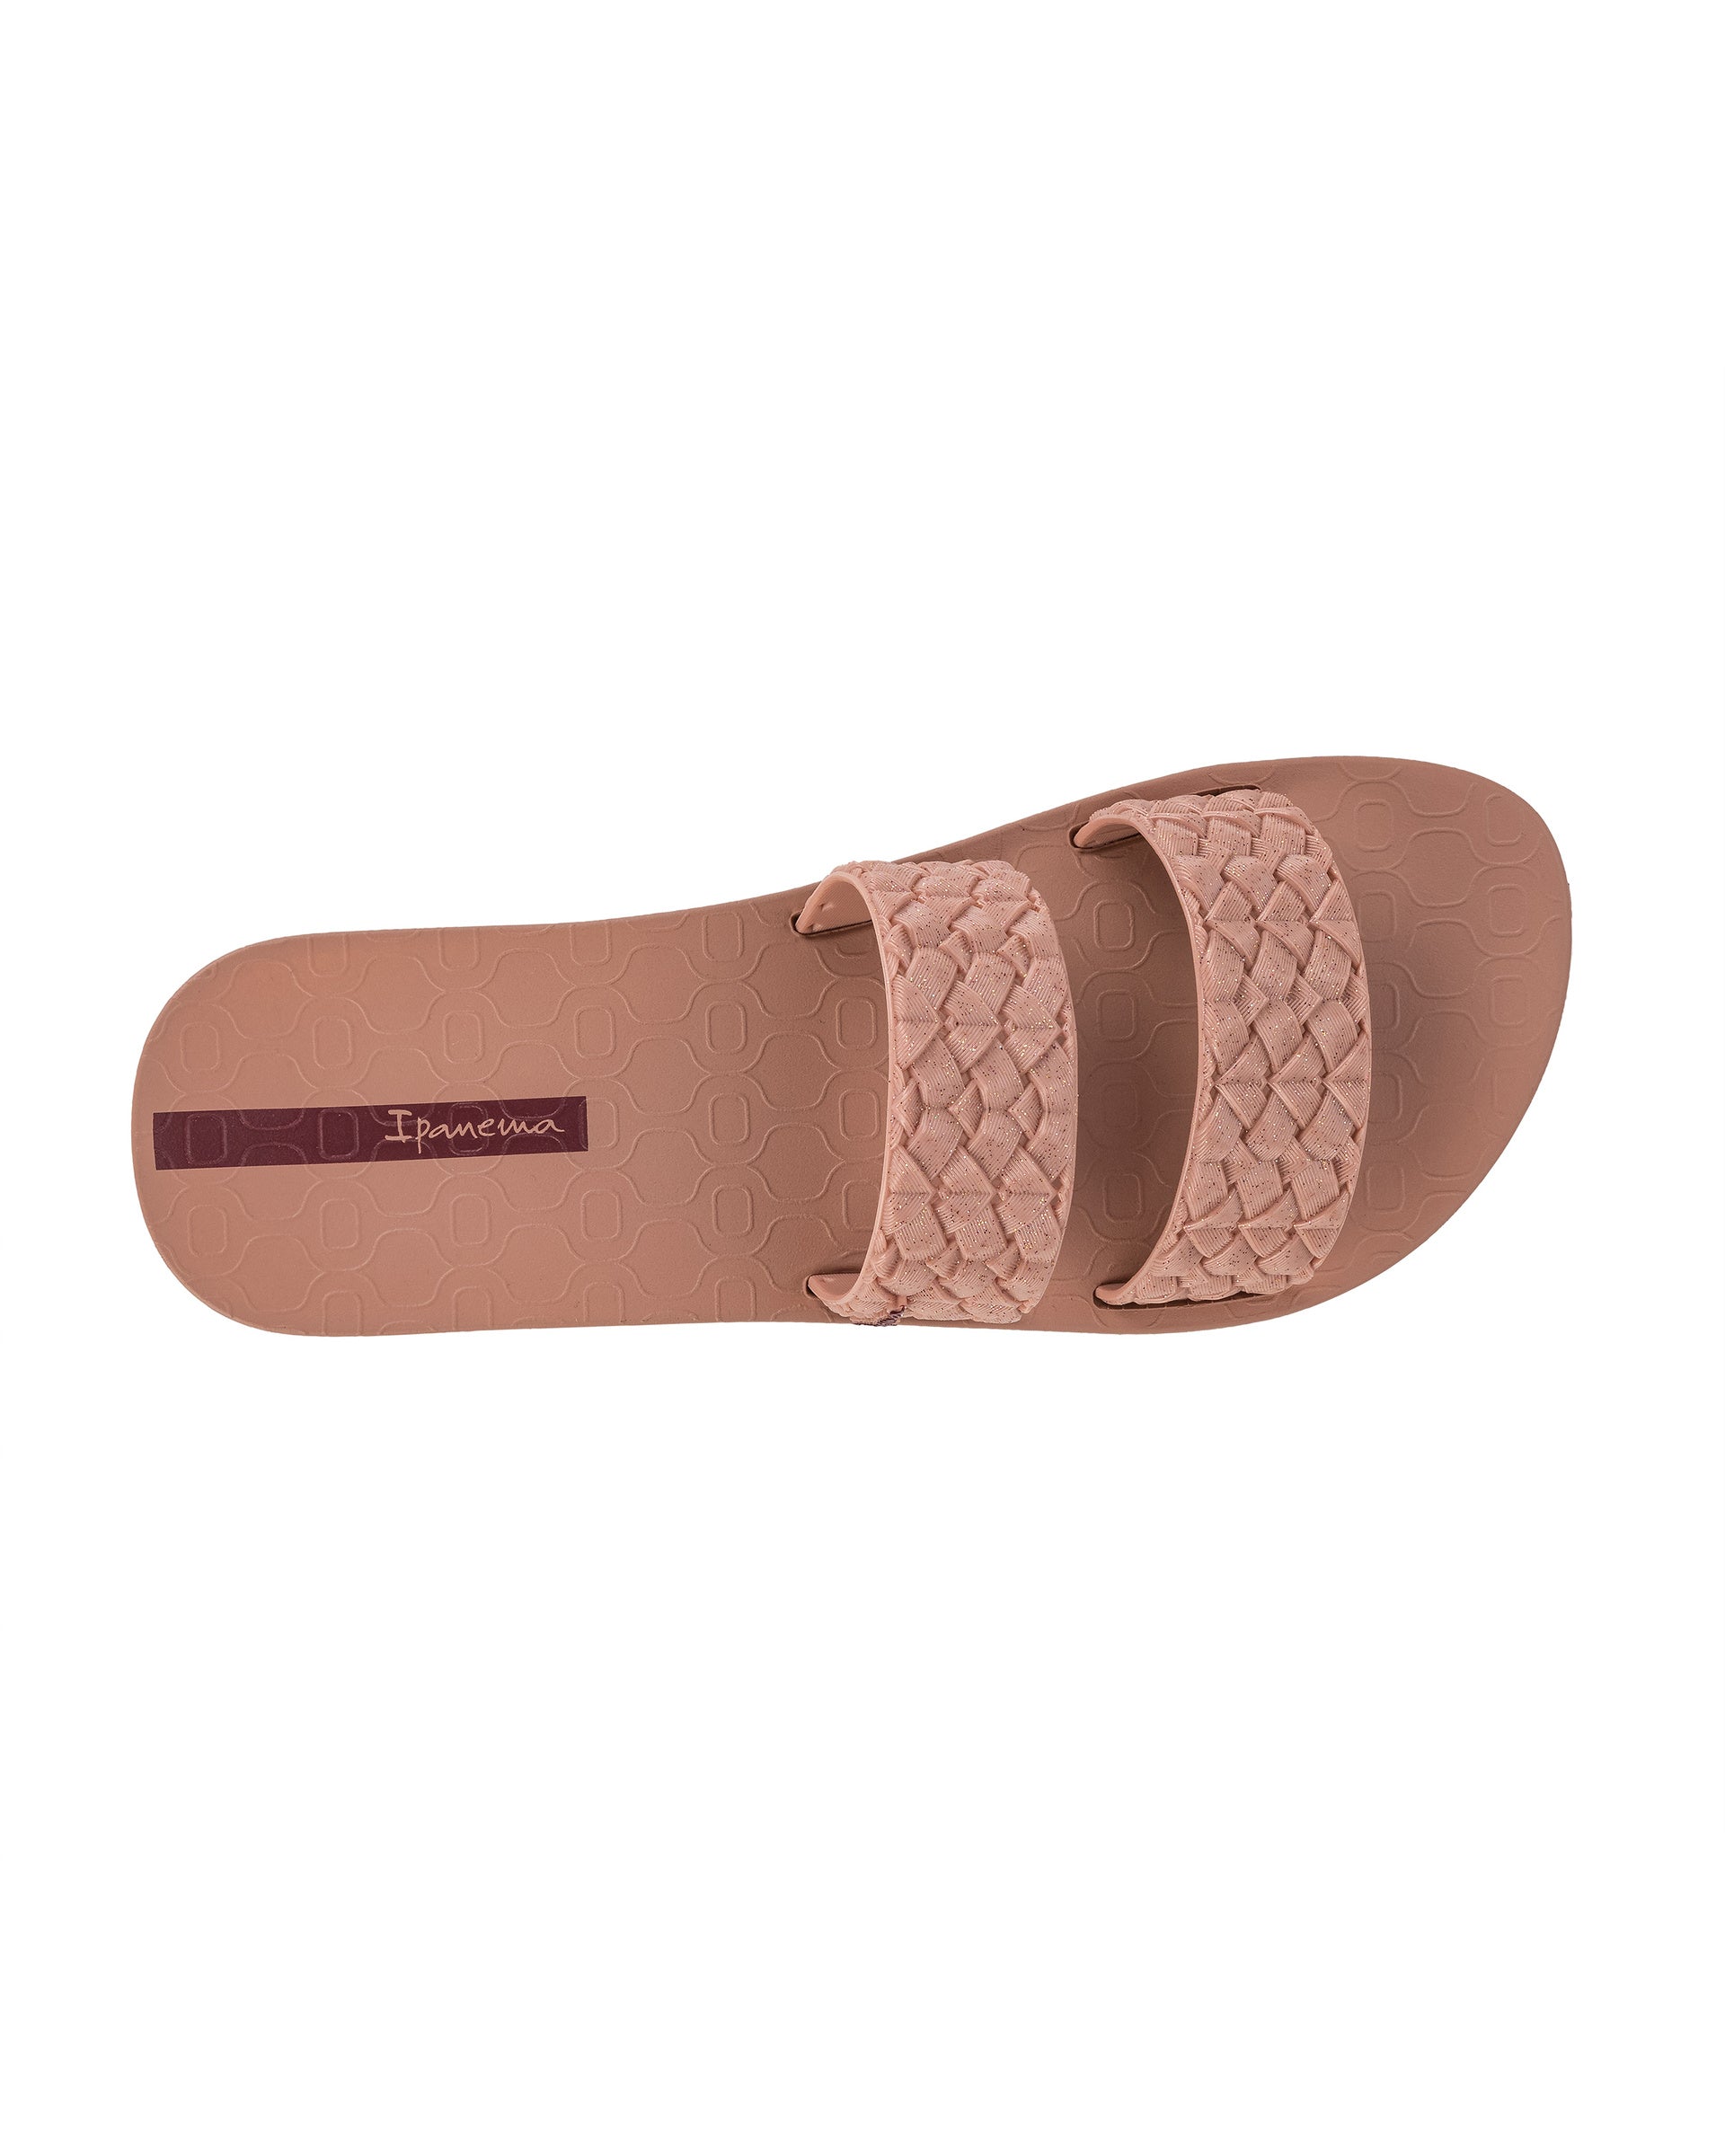 Top view of a pink Ipanema Renda women's slide with braided pink glitter straps.